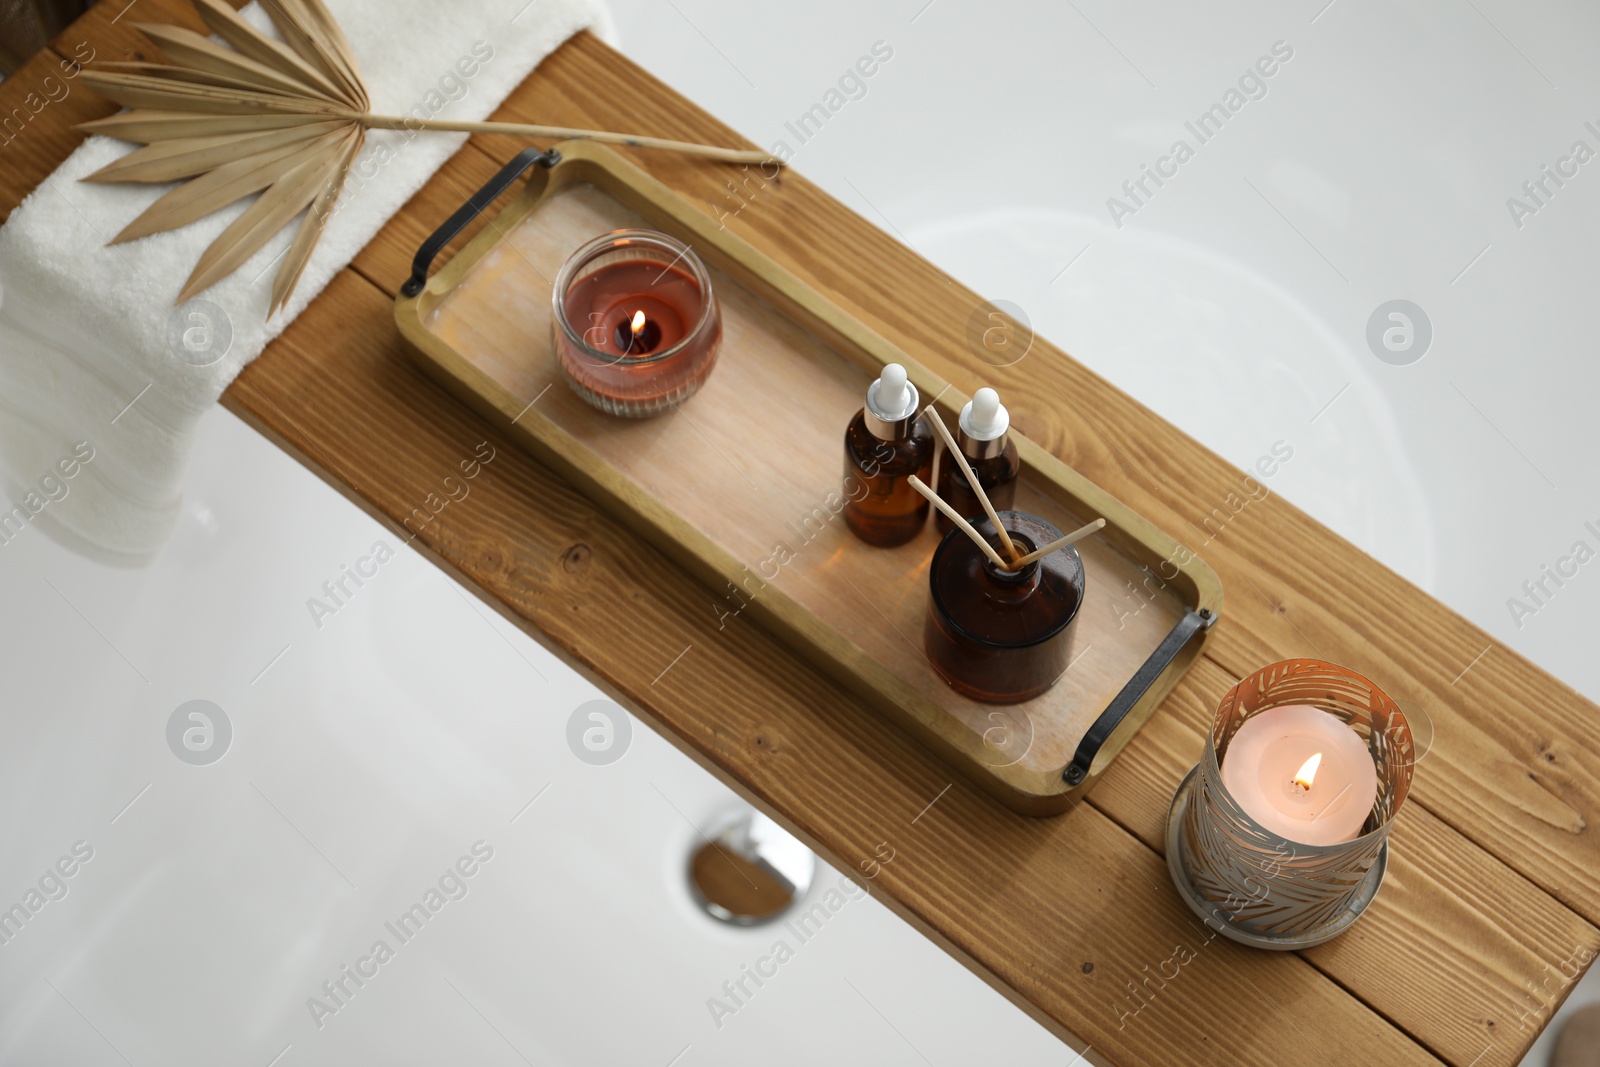 Photo of Wooden tray with cosmetic products, burning candles, and reed air freshener on bath tub in bathroom, above view